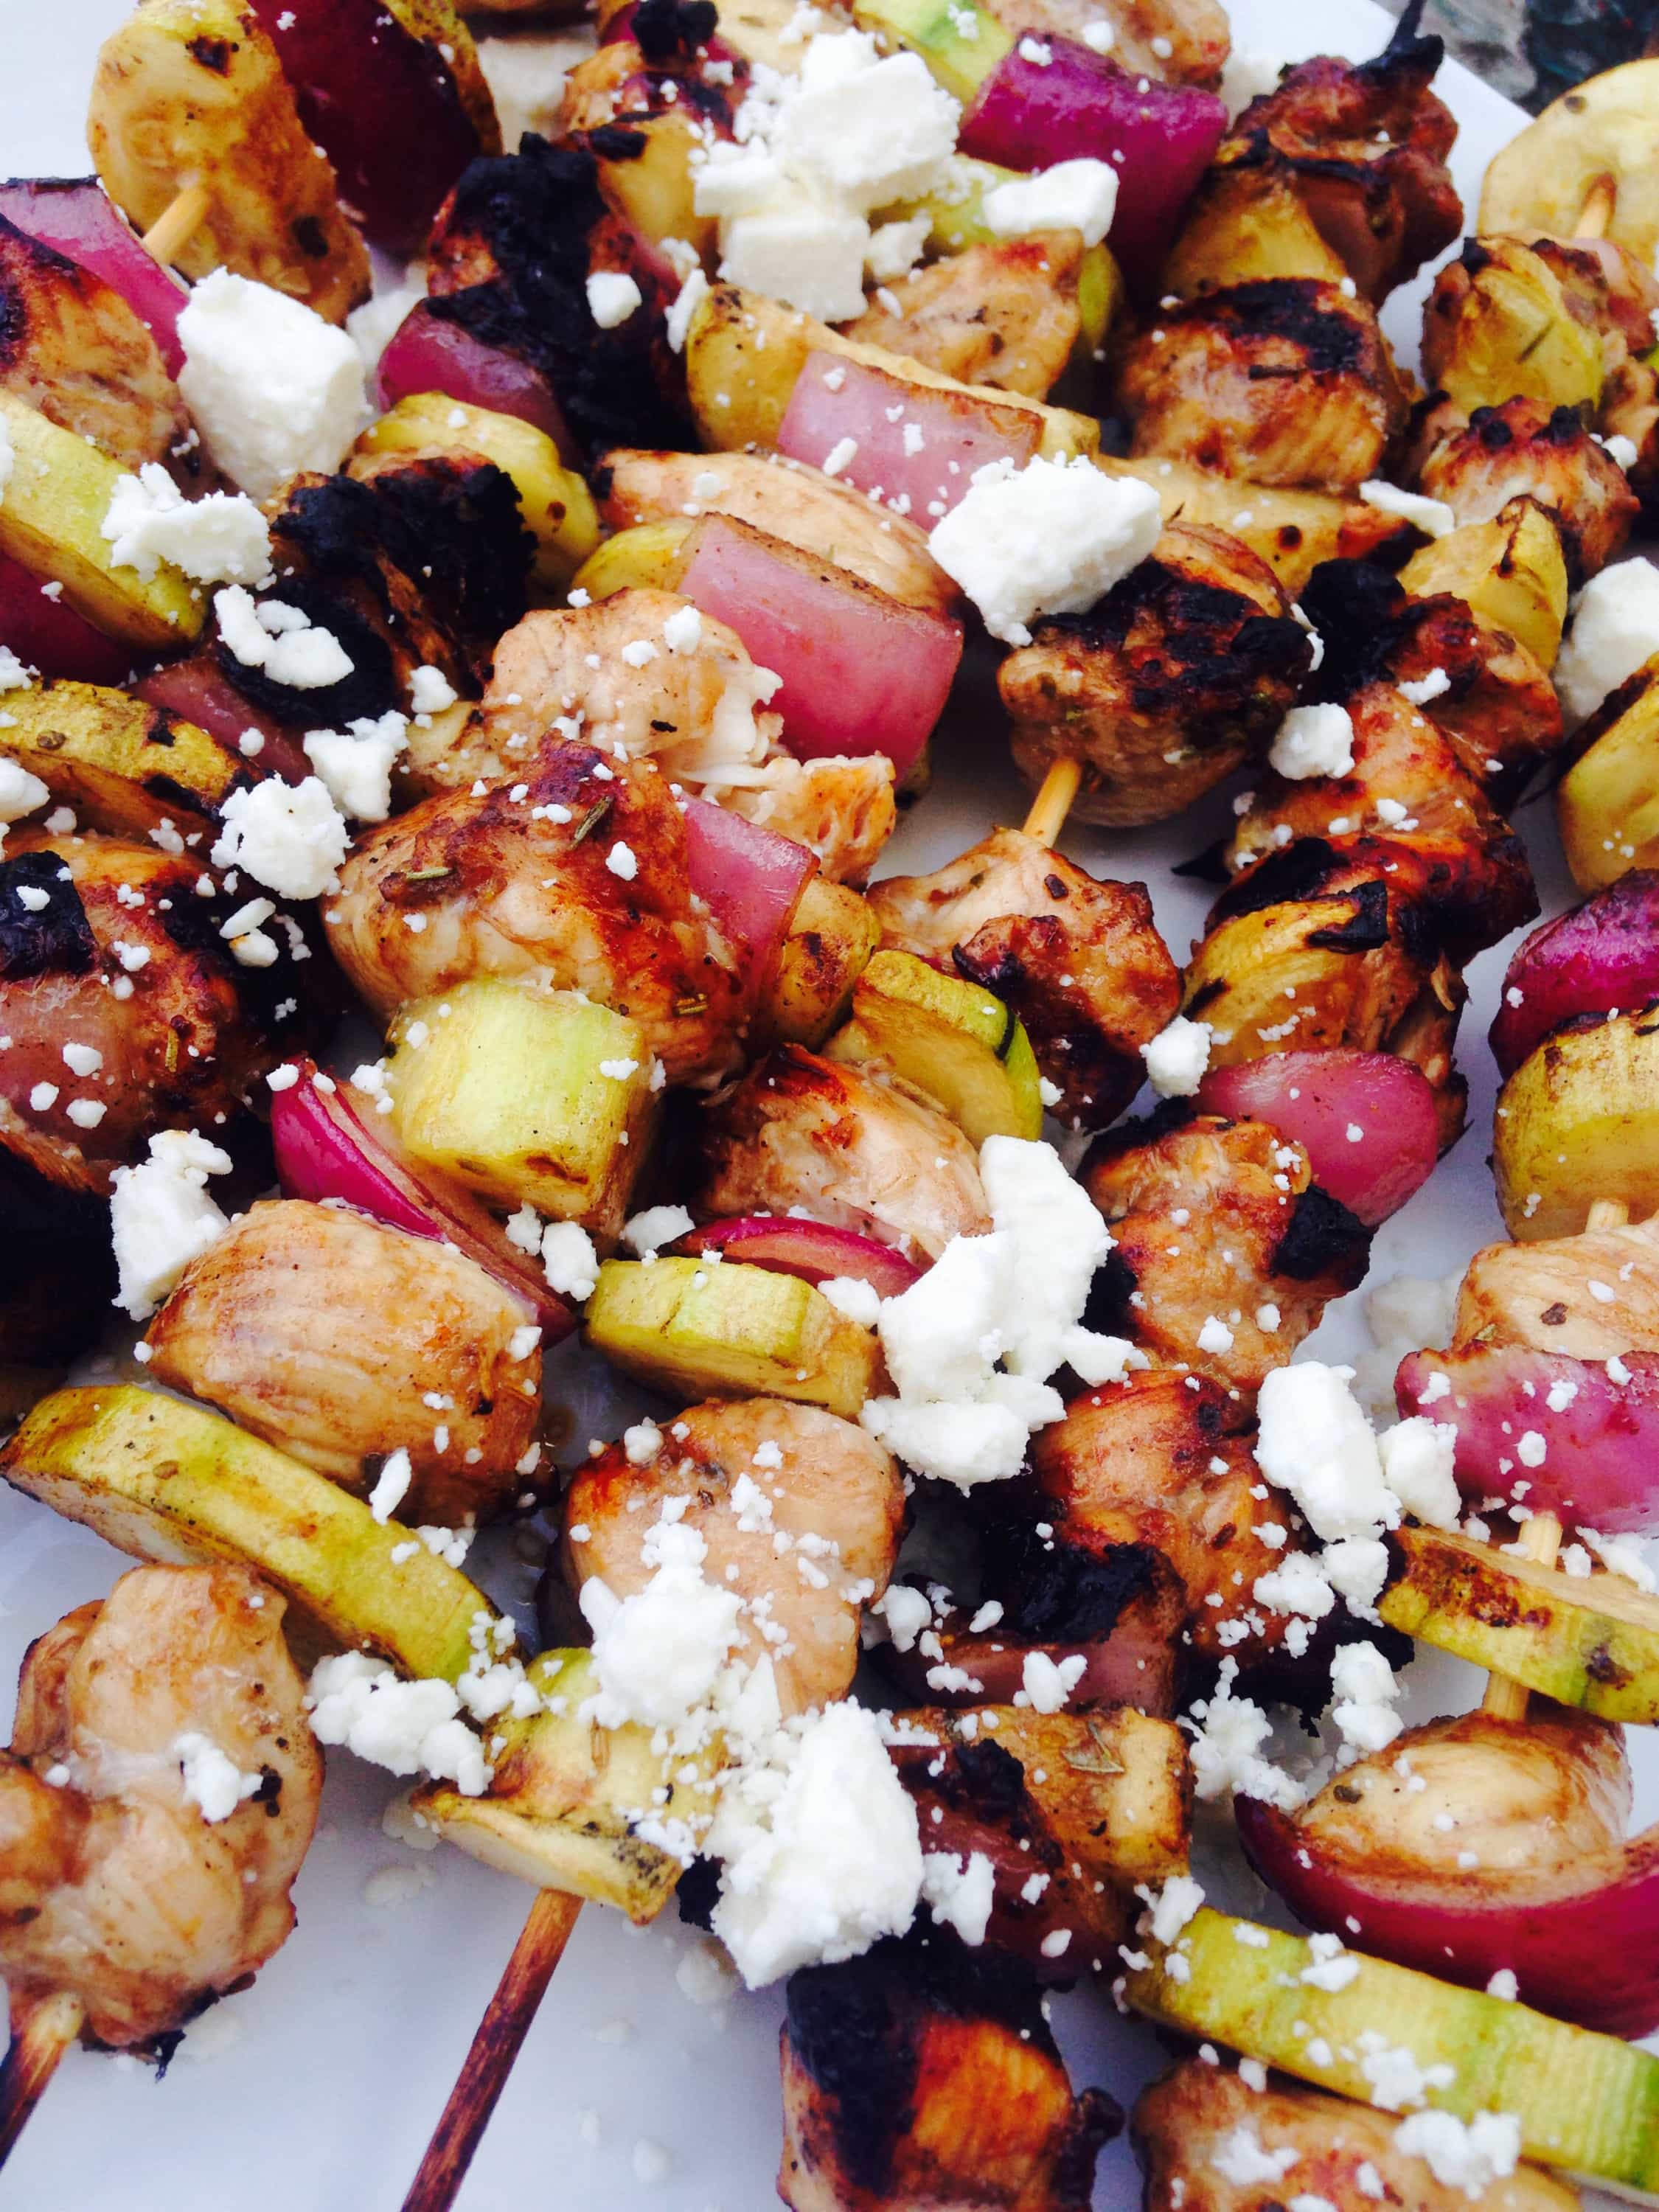 Balsamic marinated chicken, zucchini, and red onion are alternated on skewers and grilled, then topped with feta.